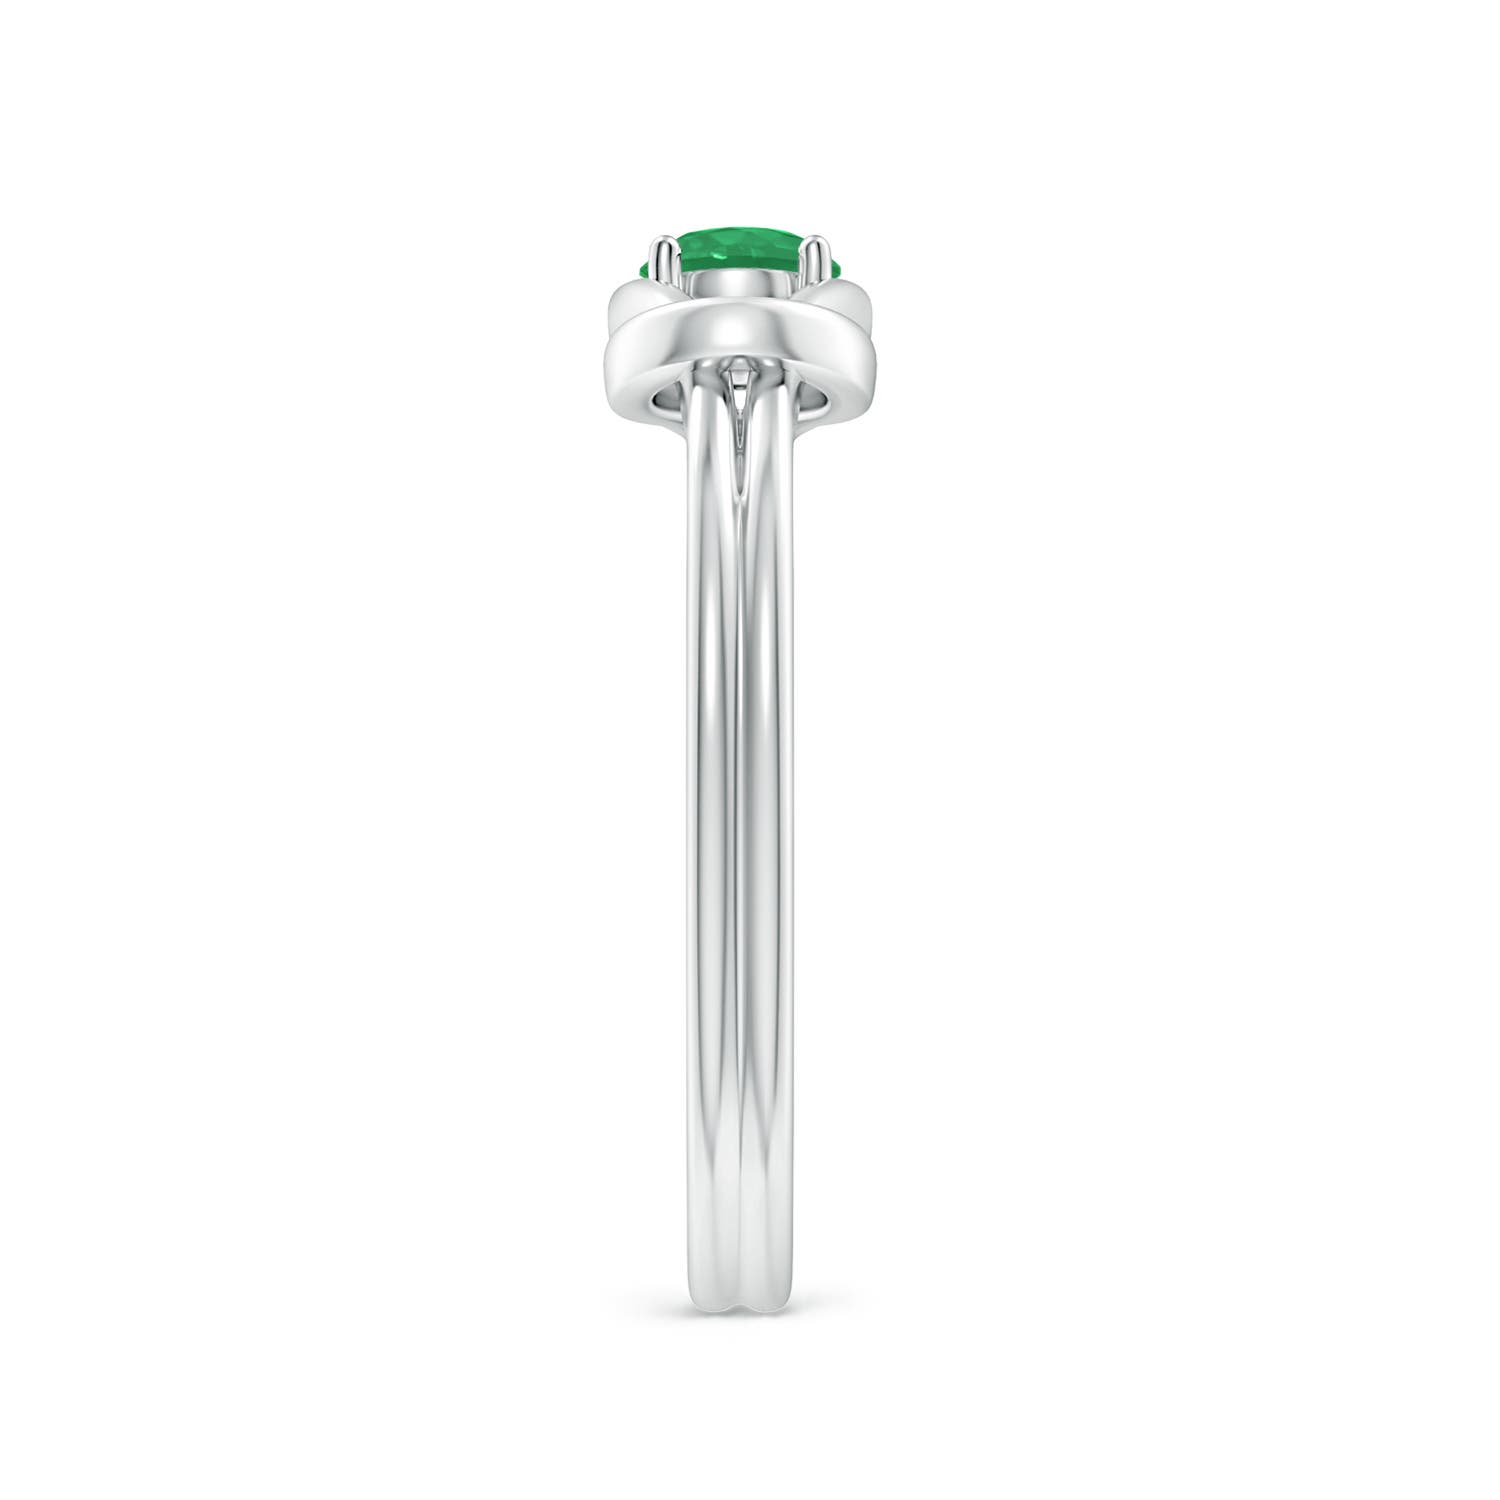 A - Emerald / 0.24 CT / 14 KT White Gold